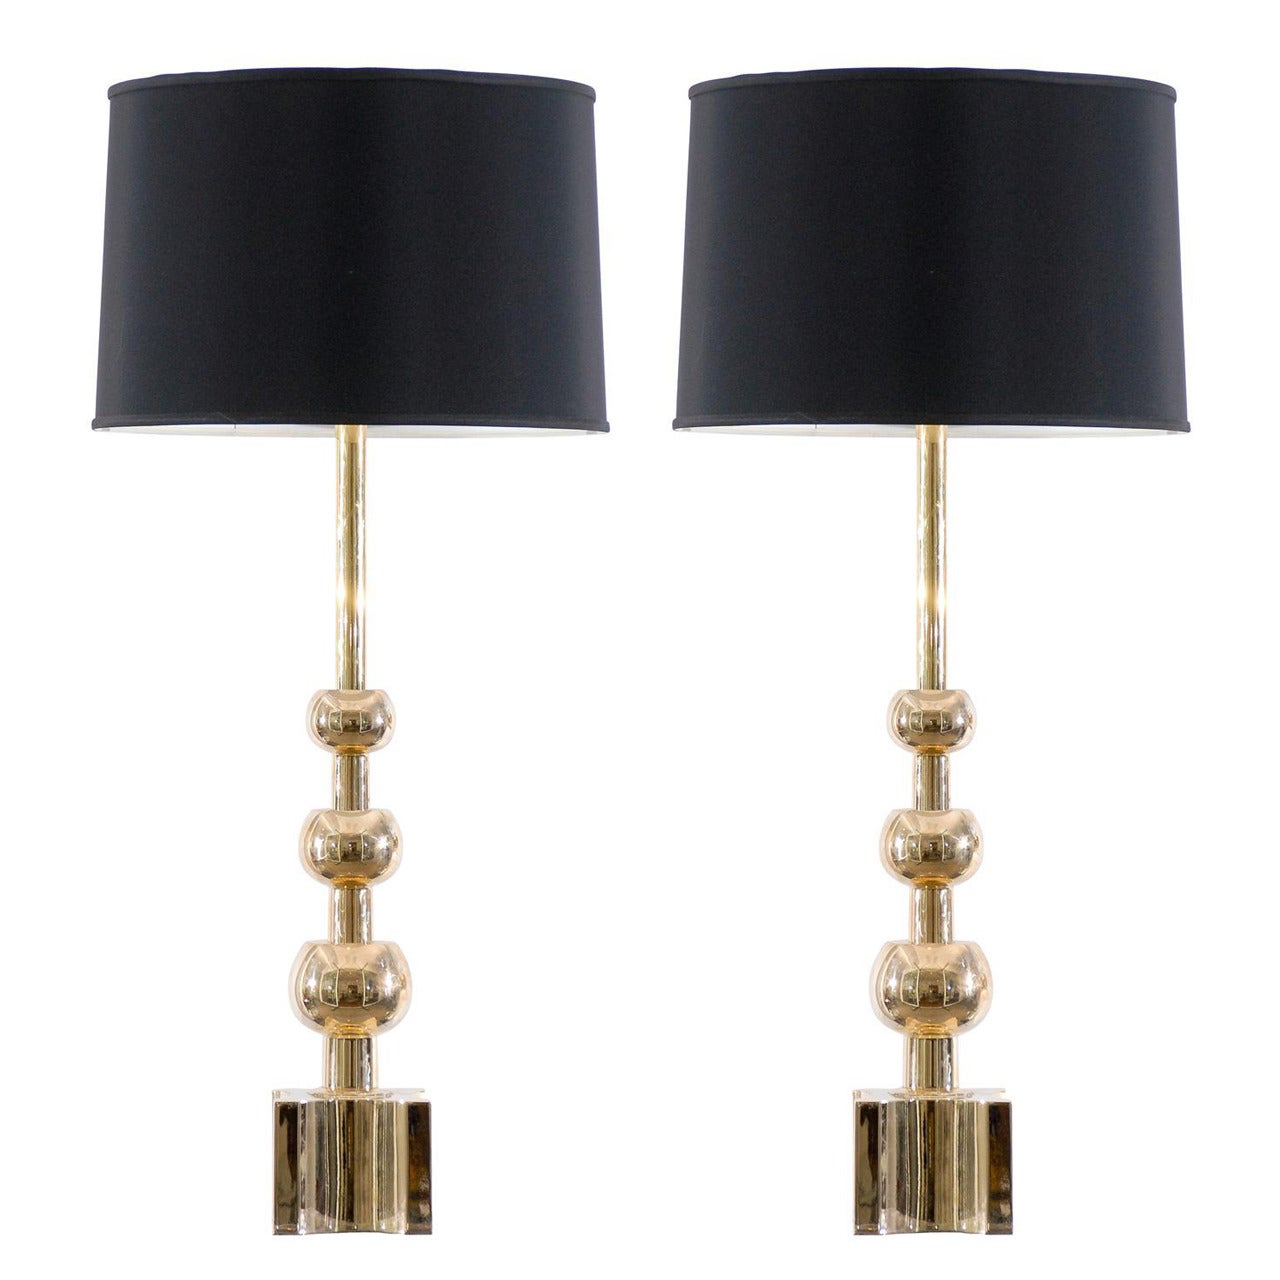 Stunning Pair of Mid-Century Brass Ball Lamps by Stiffel